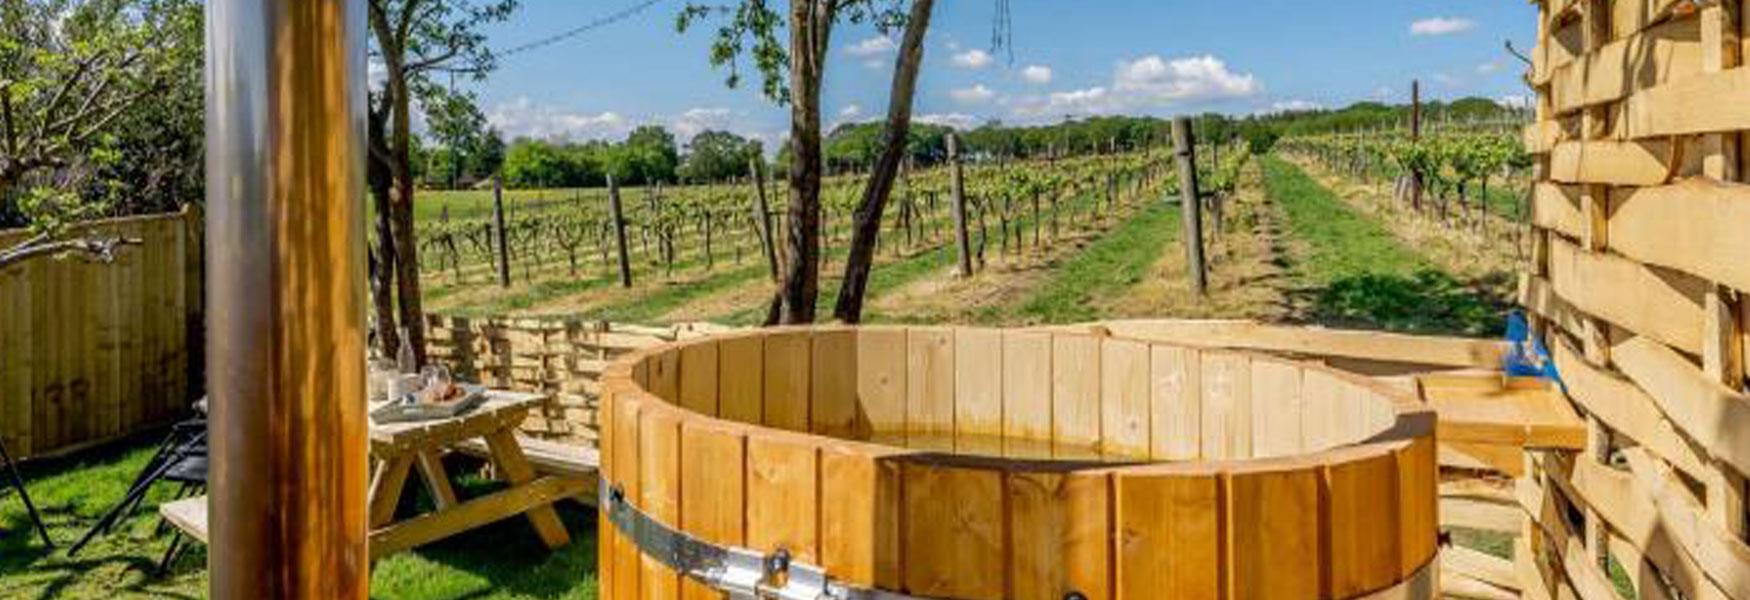 Enjoy the wood fired hot tub at The Great Escape over looking the vines at Biddenden Vineyards.  This is a glorious place to stay in the Kent countryside.  Farm shop over the road and you can drink wine from the vineyard that you are looking out over, making this a unique place to stay.